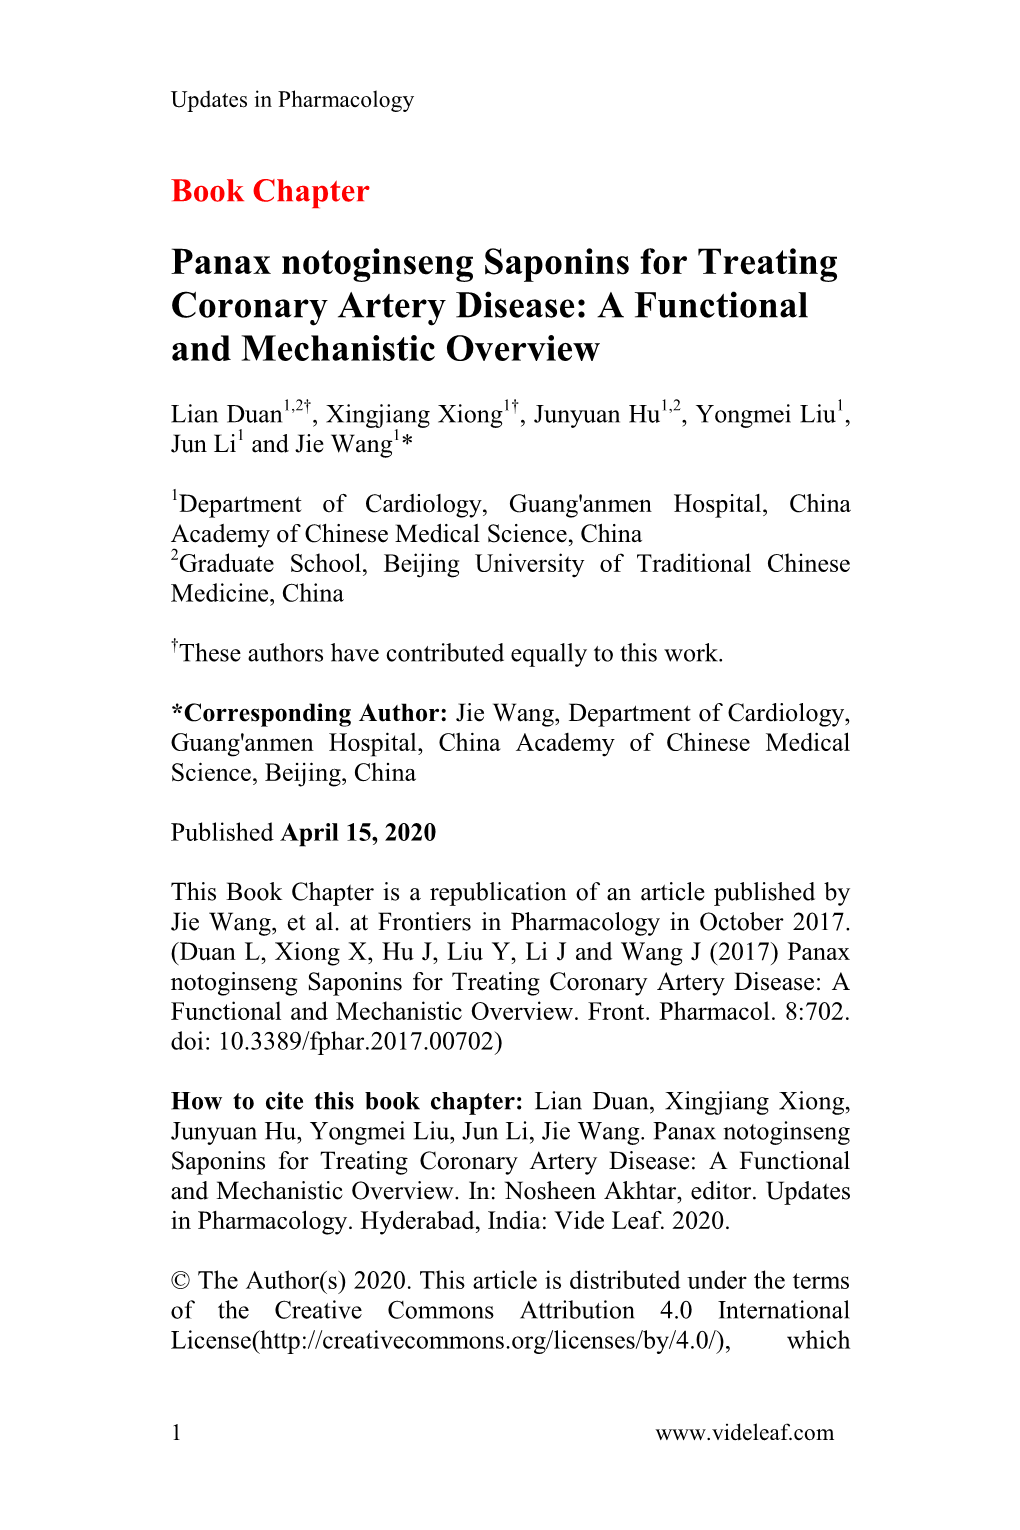 Panax Notoginseng Saponins for Treating Coronary Artery Disease: a Functional and Mechanistic Overview